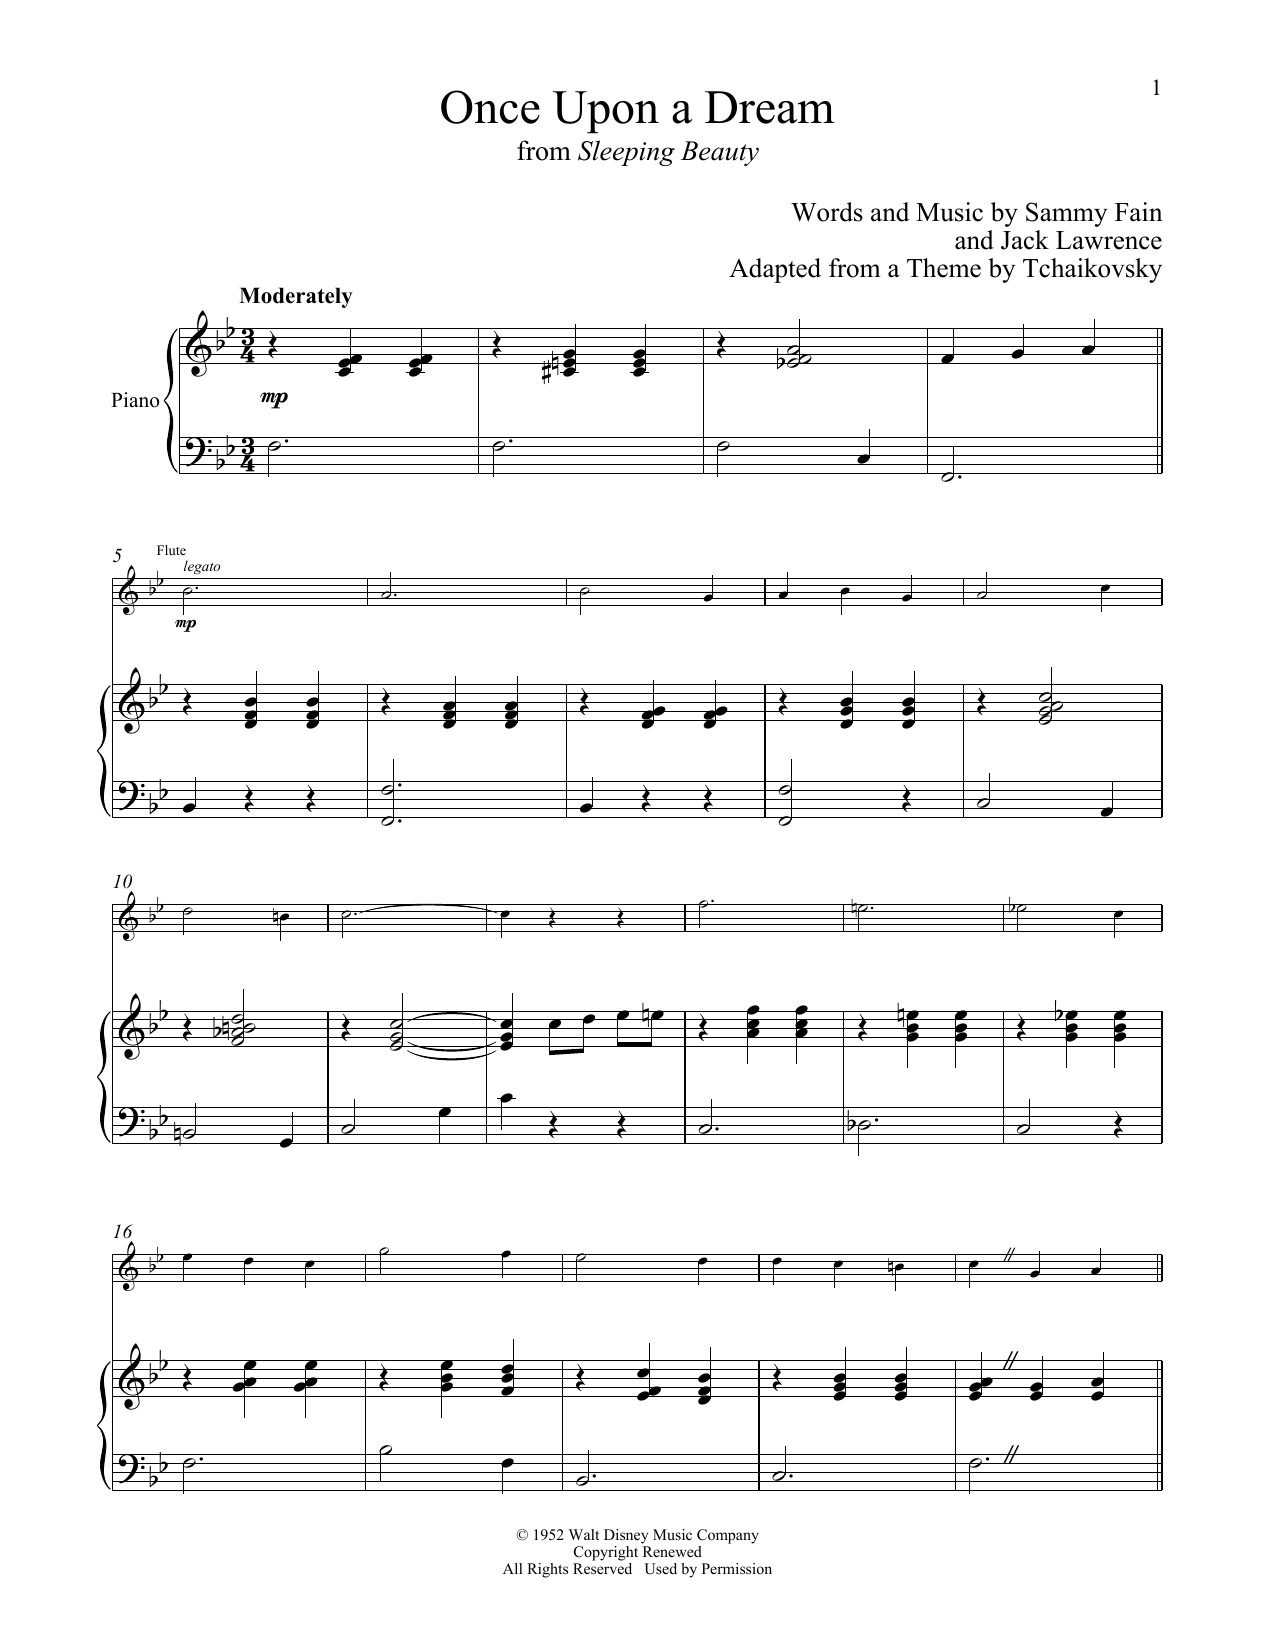 Download Sammy Fain & Jack Lawrence Once Upon A Dream (from Sleeping Beauty Sheet Music